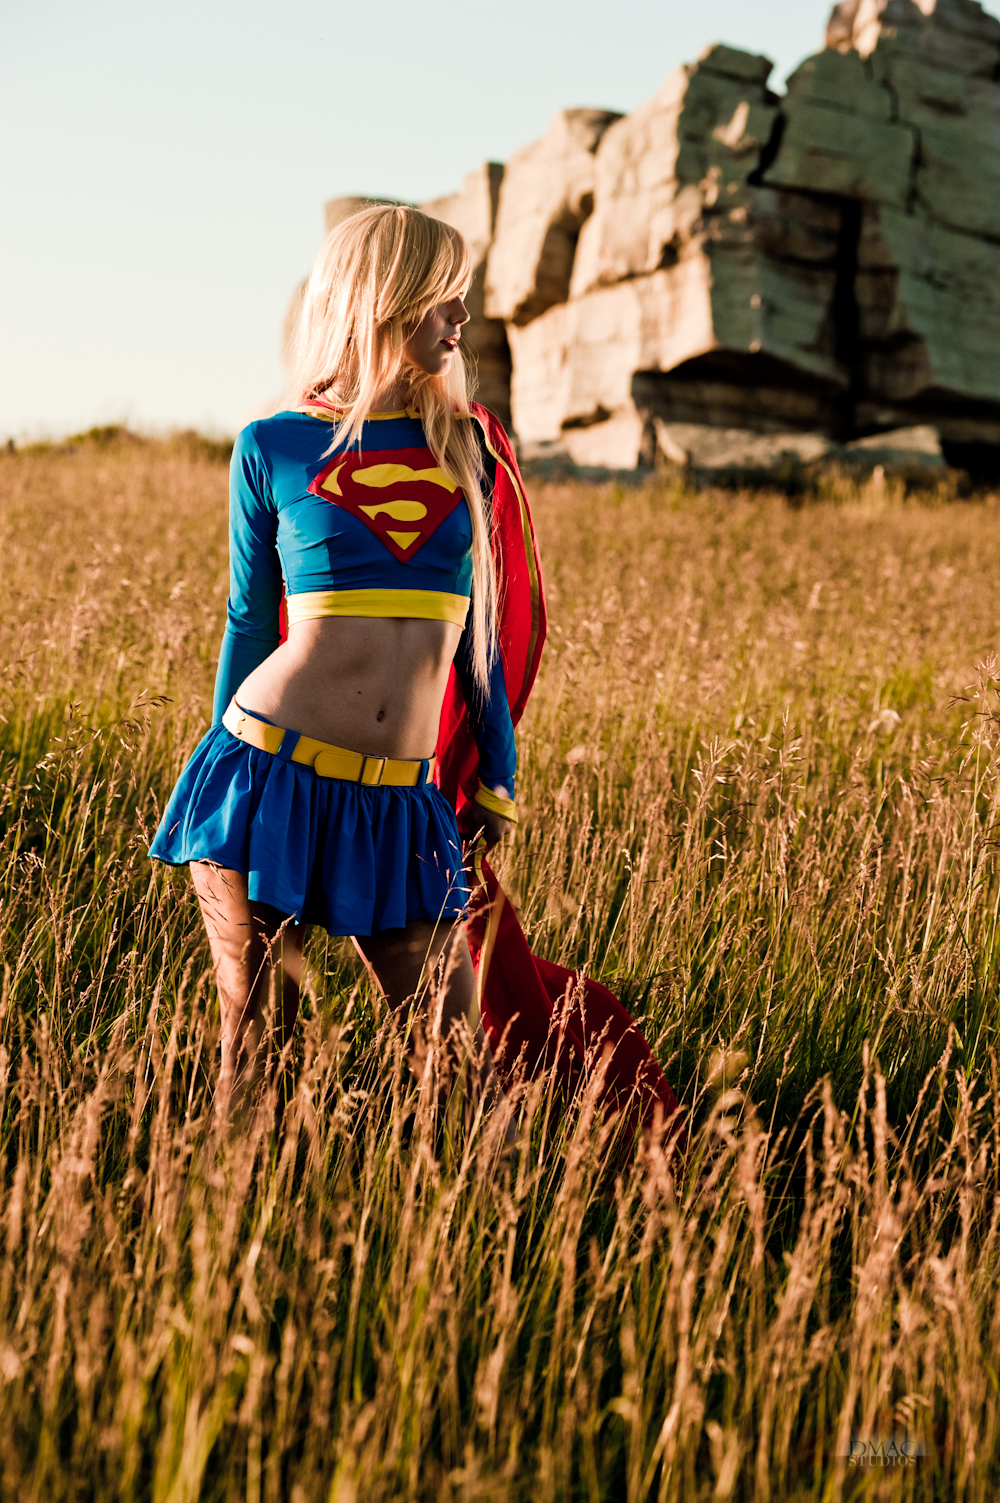 Shut-up-and-duel-me is Supergirl